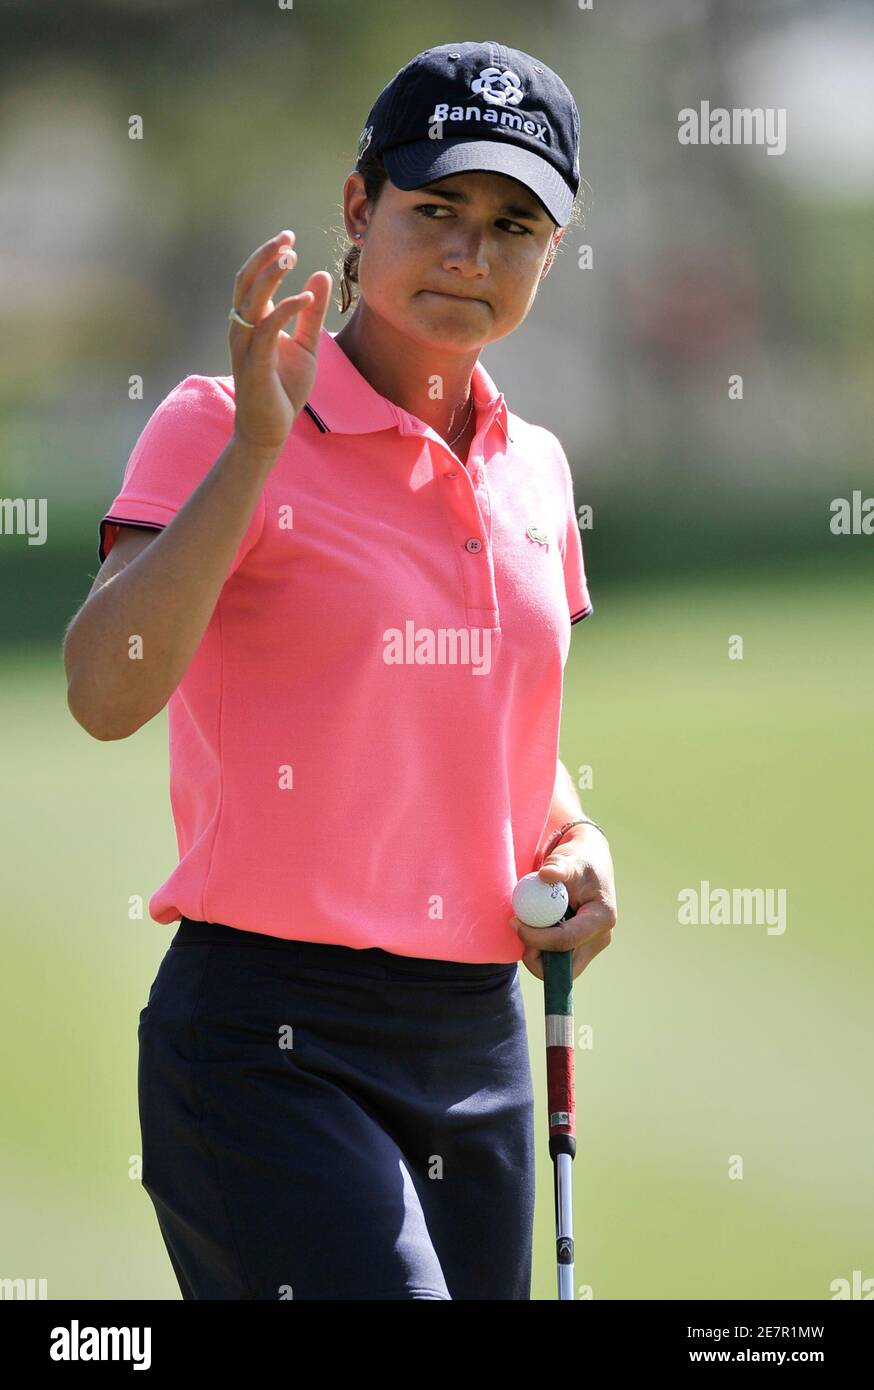 Lorena Ochoa of Mexico waves to the crowd as she putts out on the first hole during final round play of the LPGA's Kraft Nabisco Championship golf tournament in Rancho Mirage, California, April 4, 2010.  REUTERS/Gus Ruelas (UNITED STATES - Tags: SPORT GOLF) Stock Photo